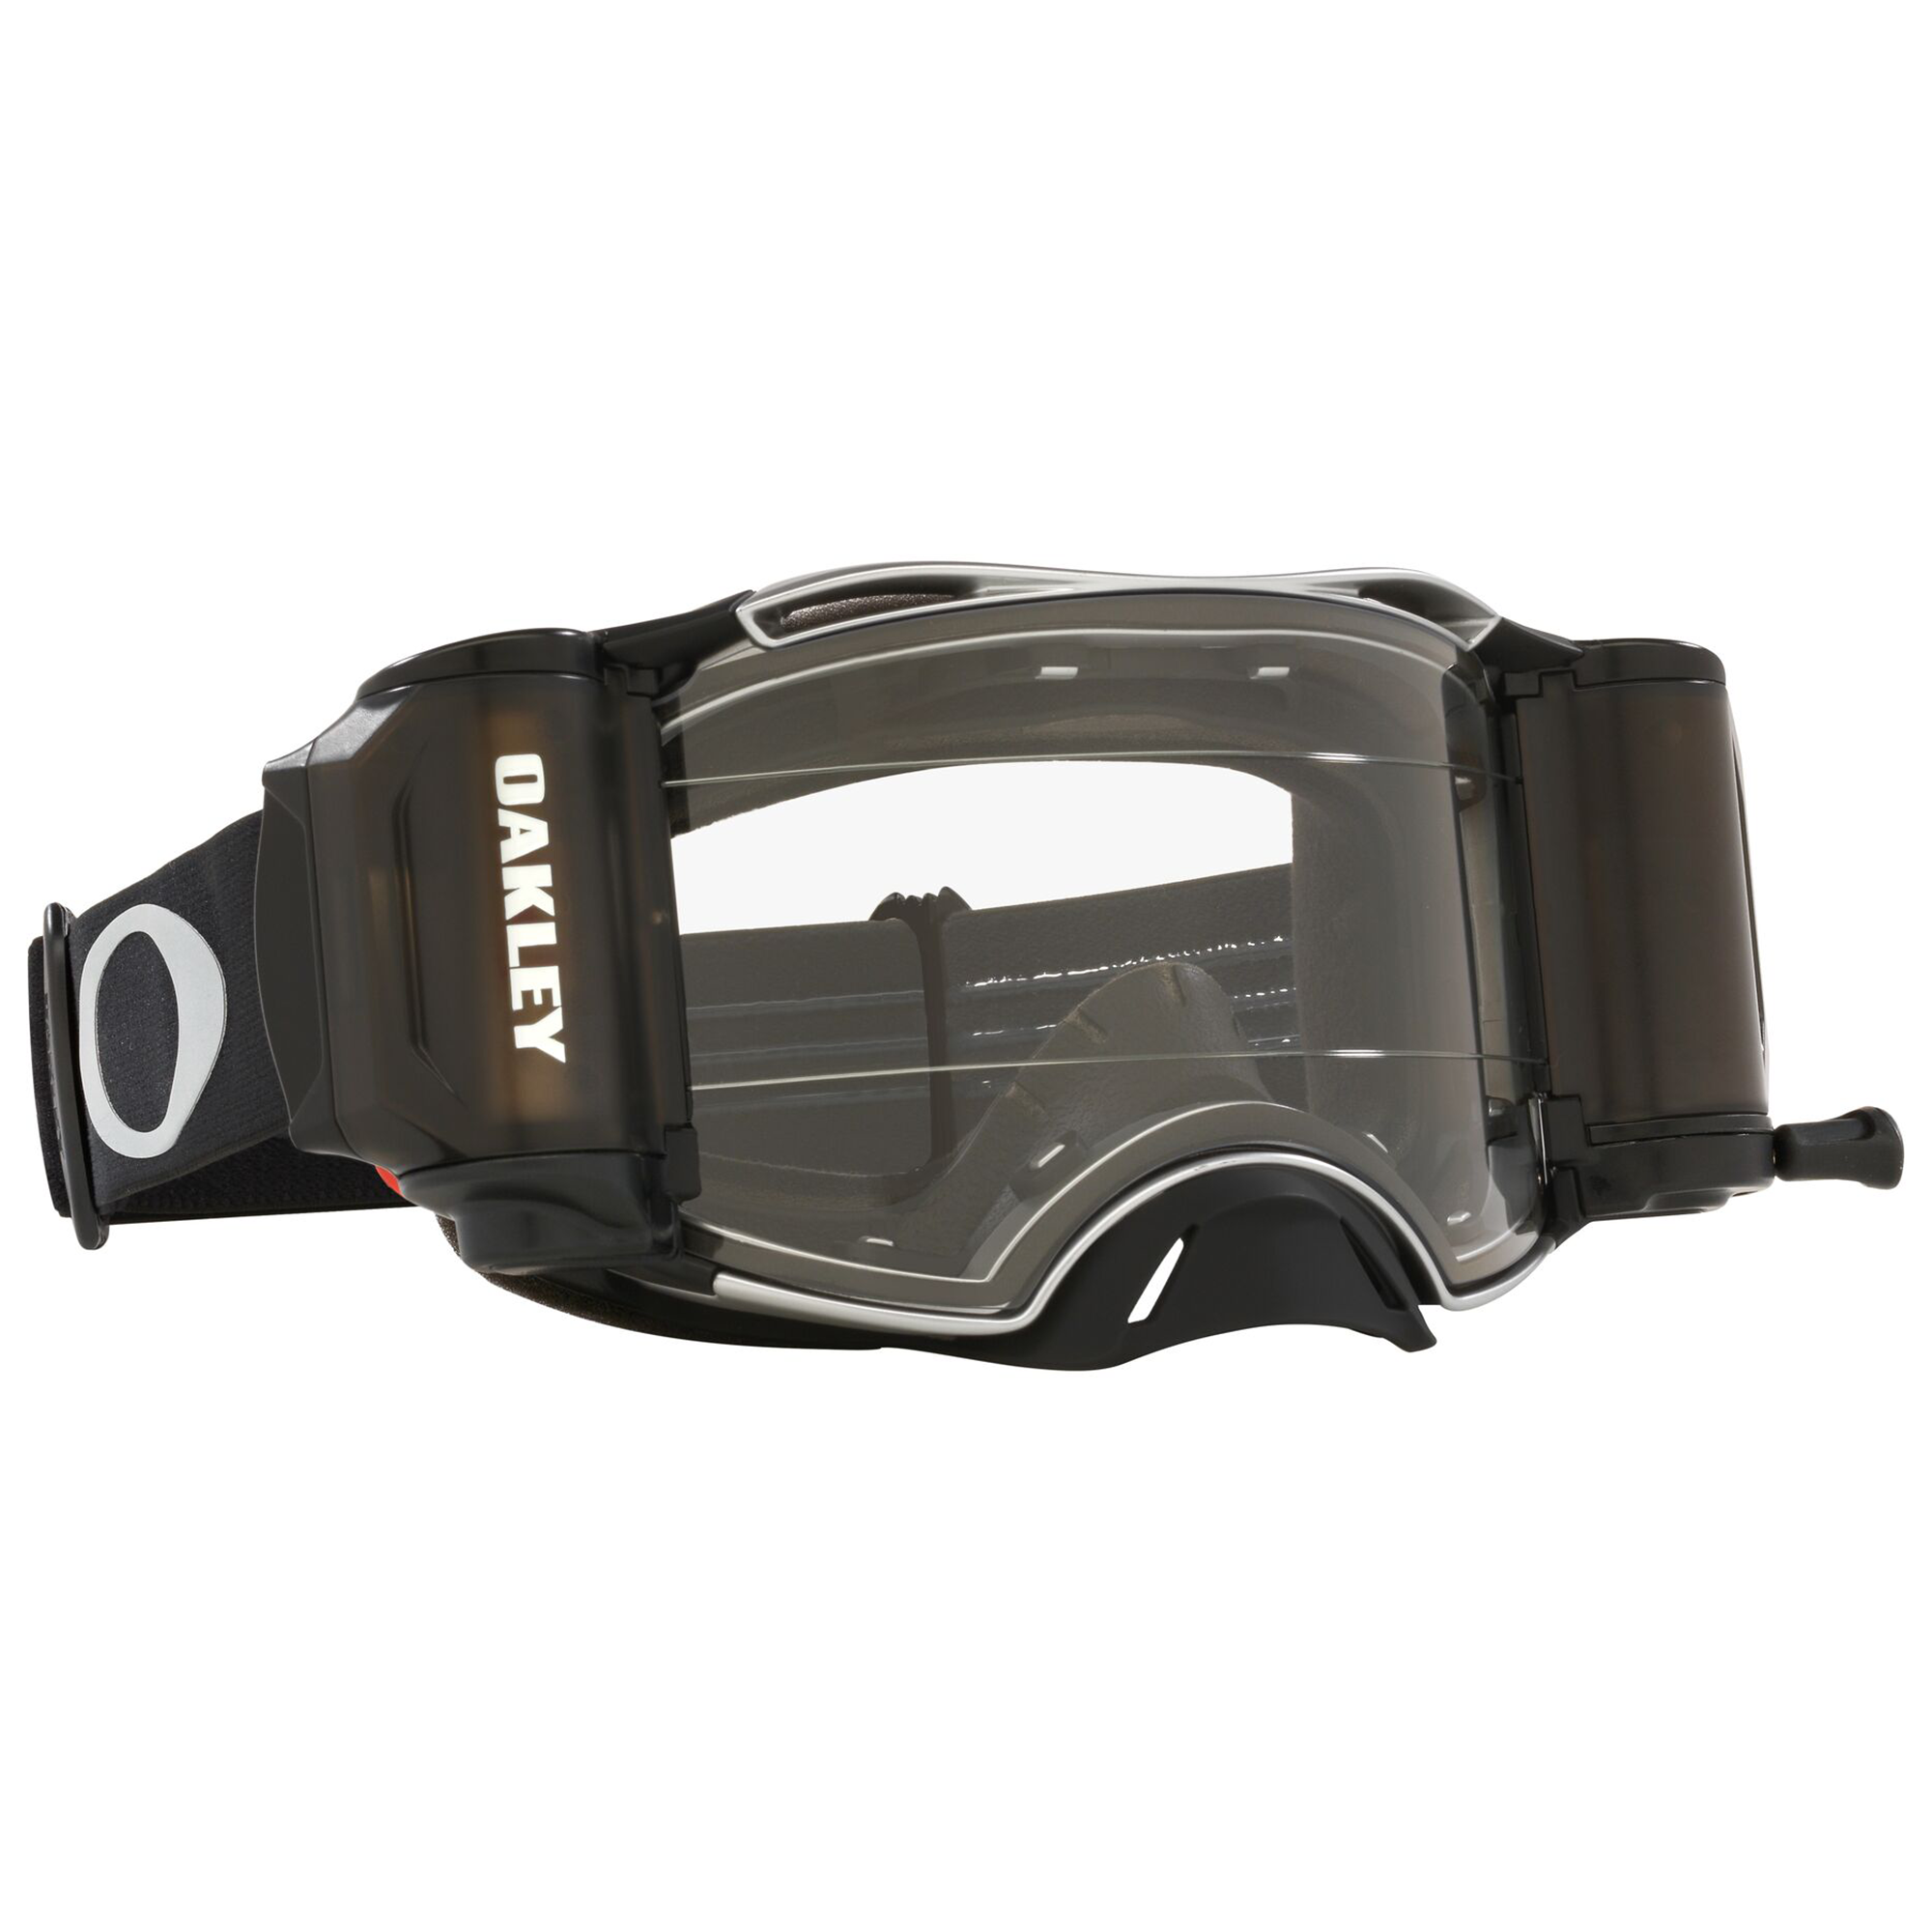 Oakley Airbrake MX Goggle in Tuff Blocks Black/Gunmetal with Clear Lens and Roll Offs included